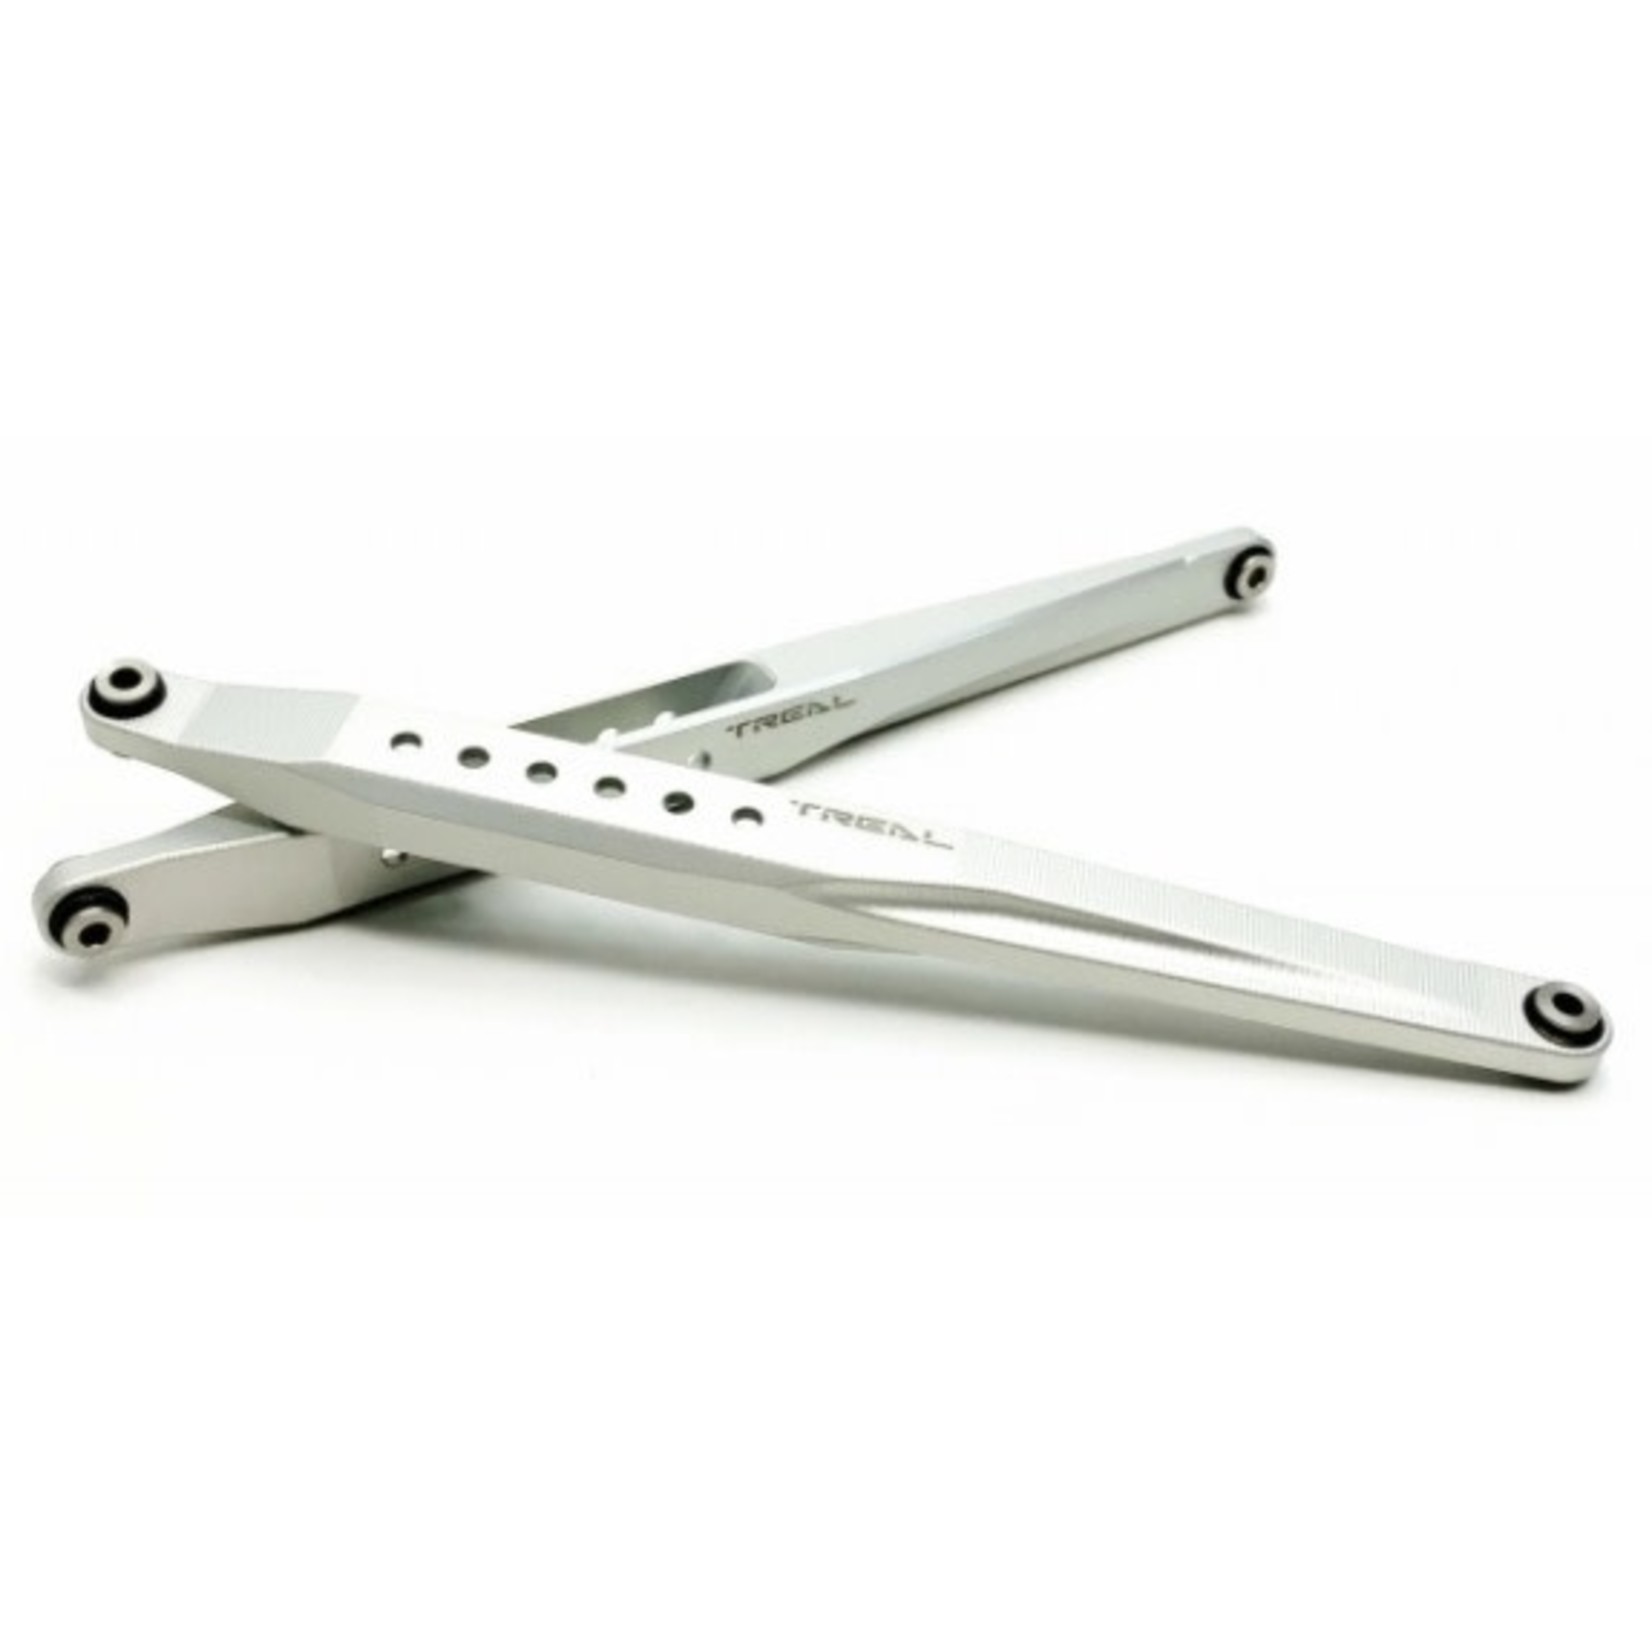 Treal Treal Aluminum 7075 CNC Machined Rear Trailing Arms(2) for Axial 1/10 RBX10 Ryft #X002X9SPK9